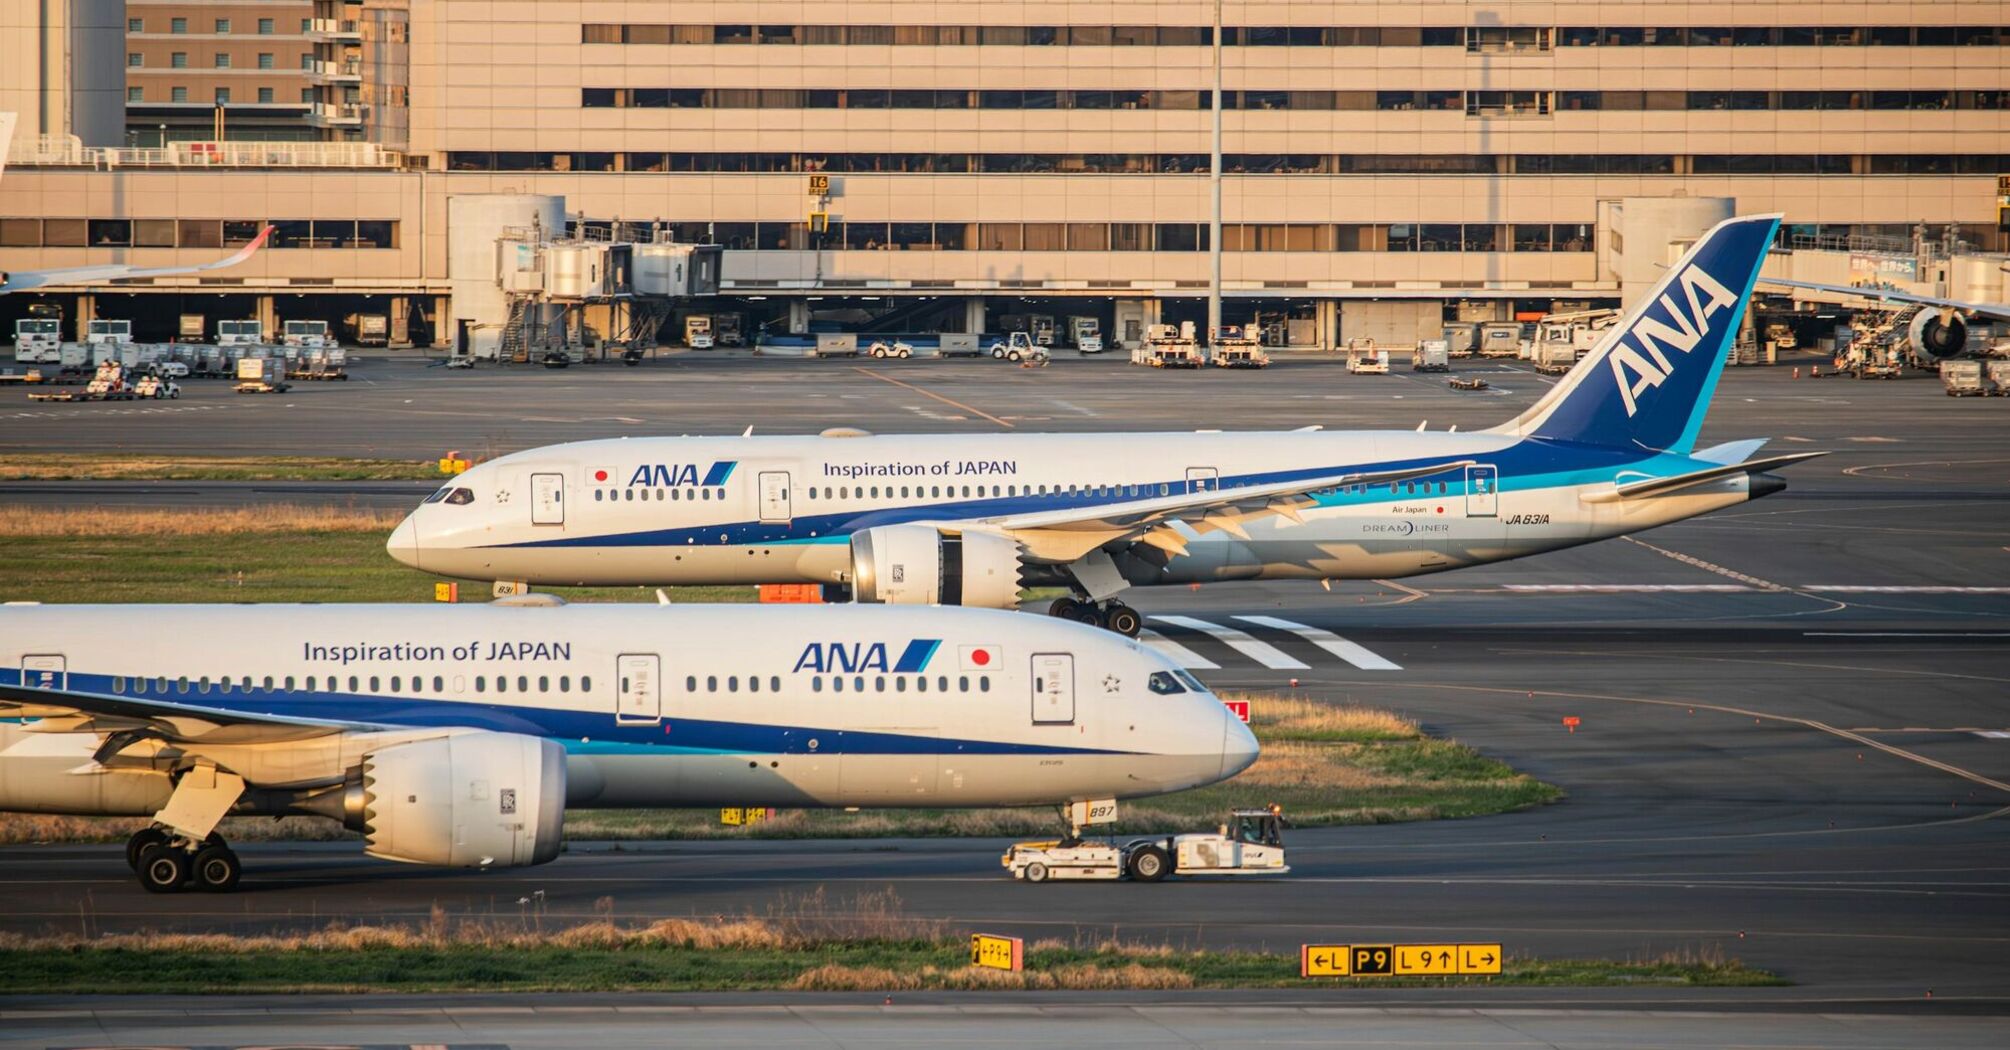 ANA airplanes on the runway at an airport